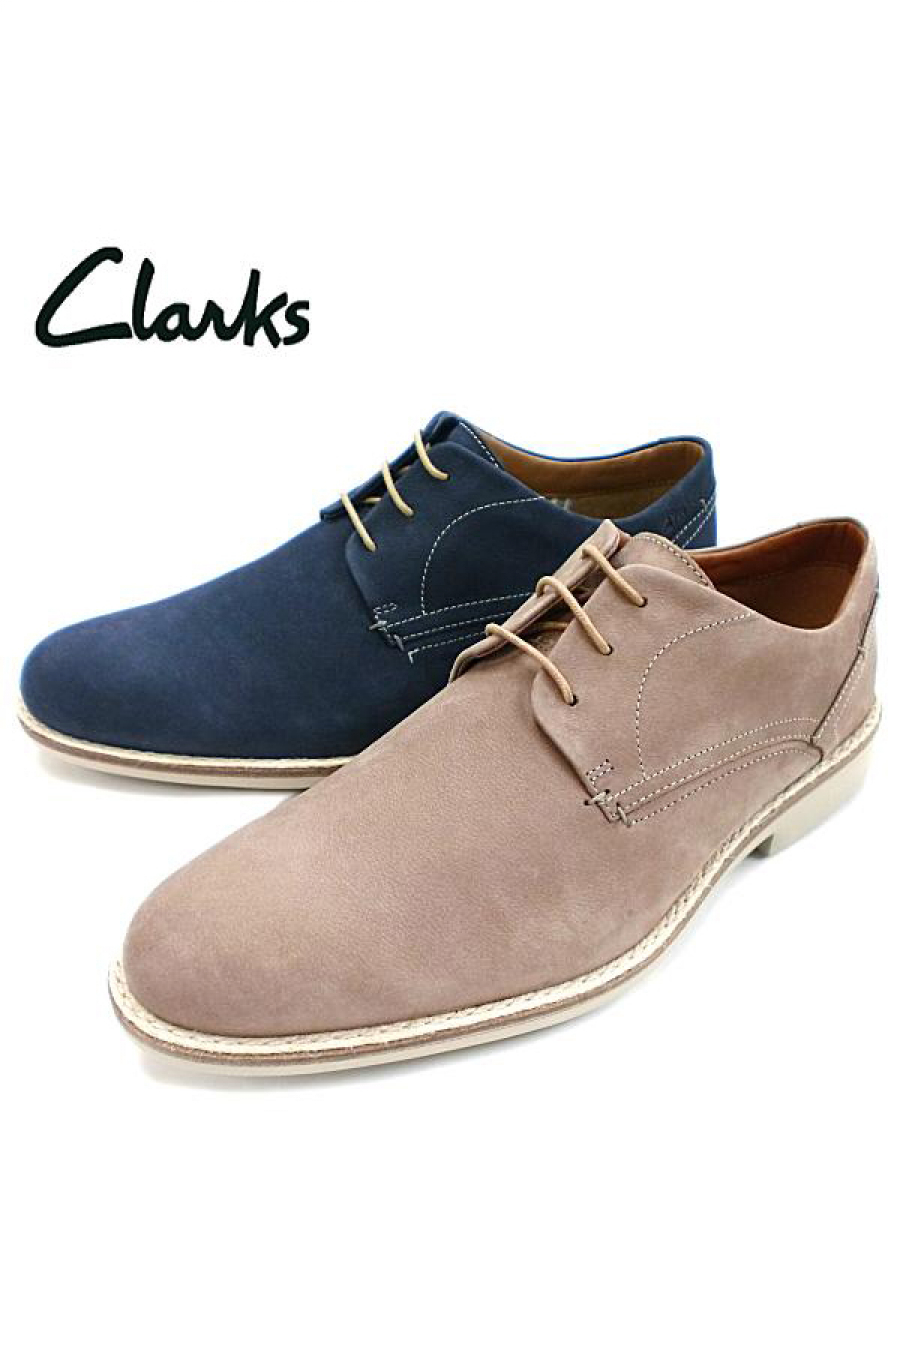 where to find clarks shoes